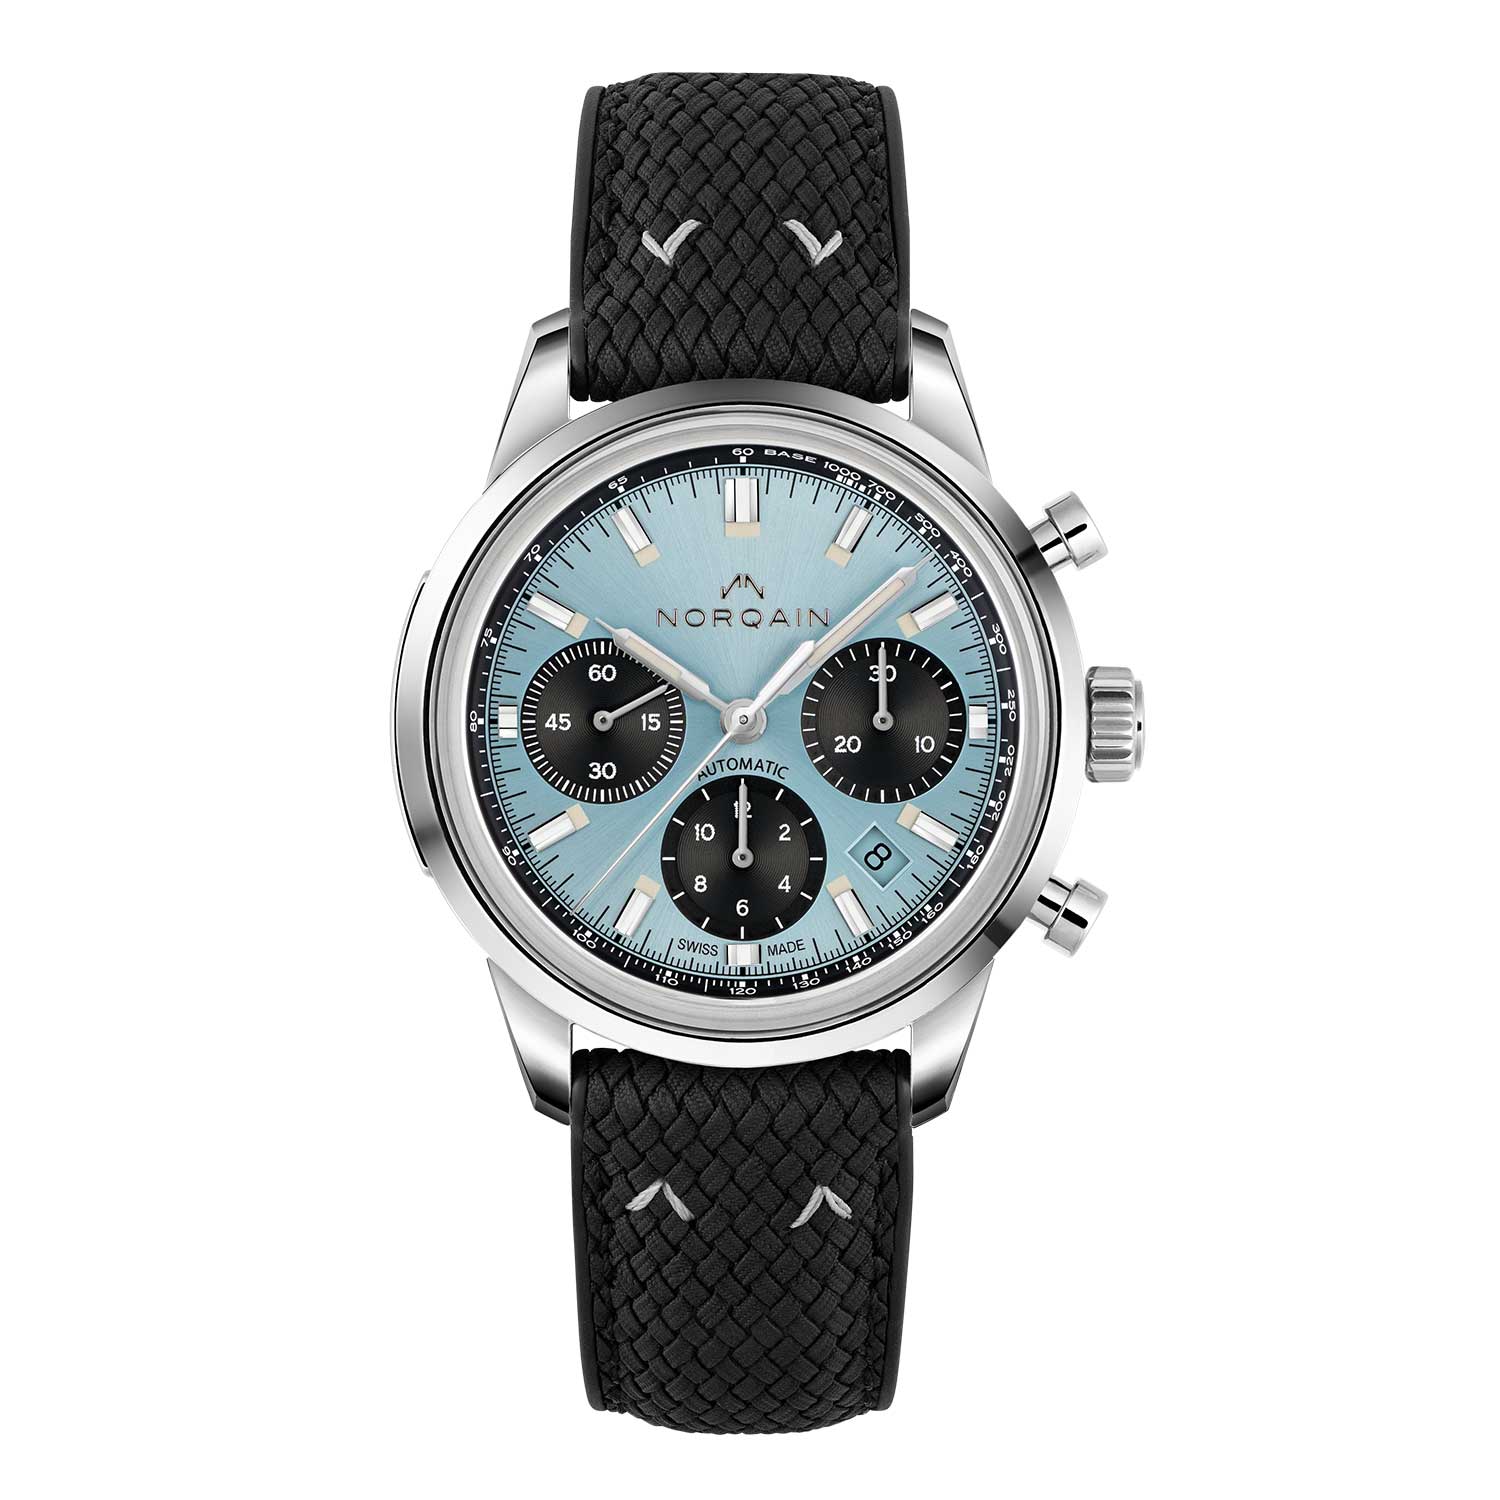 Norqain Freedom 60 Chrono Ice Blue Limited Edition with Perlon Rubber Strap